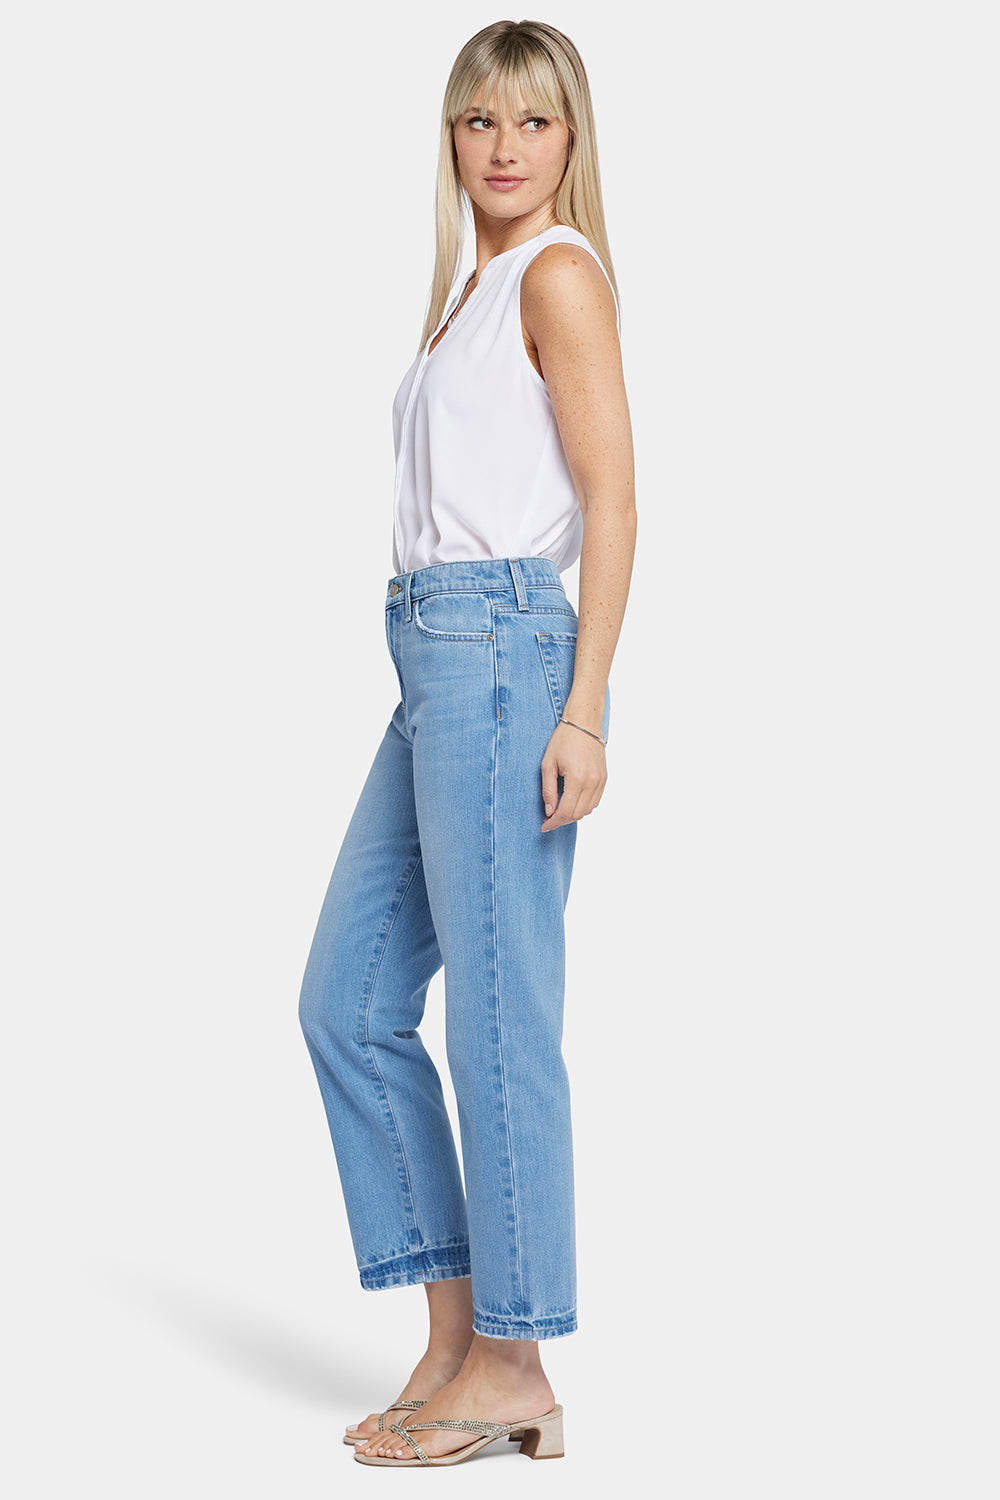 NYDJ Charlotte Relaxed Jeans In Rigid Denim With Super High Rise - Riviera Sky